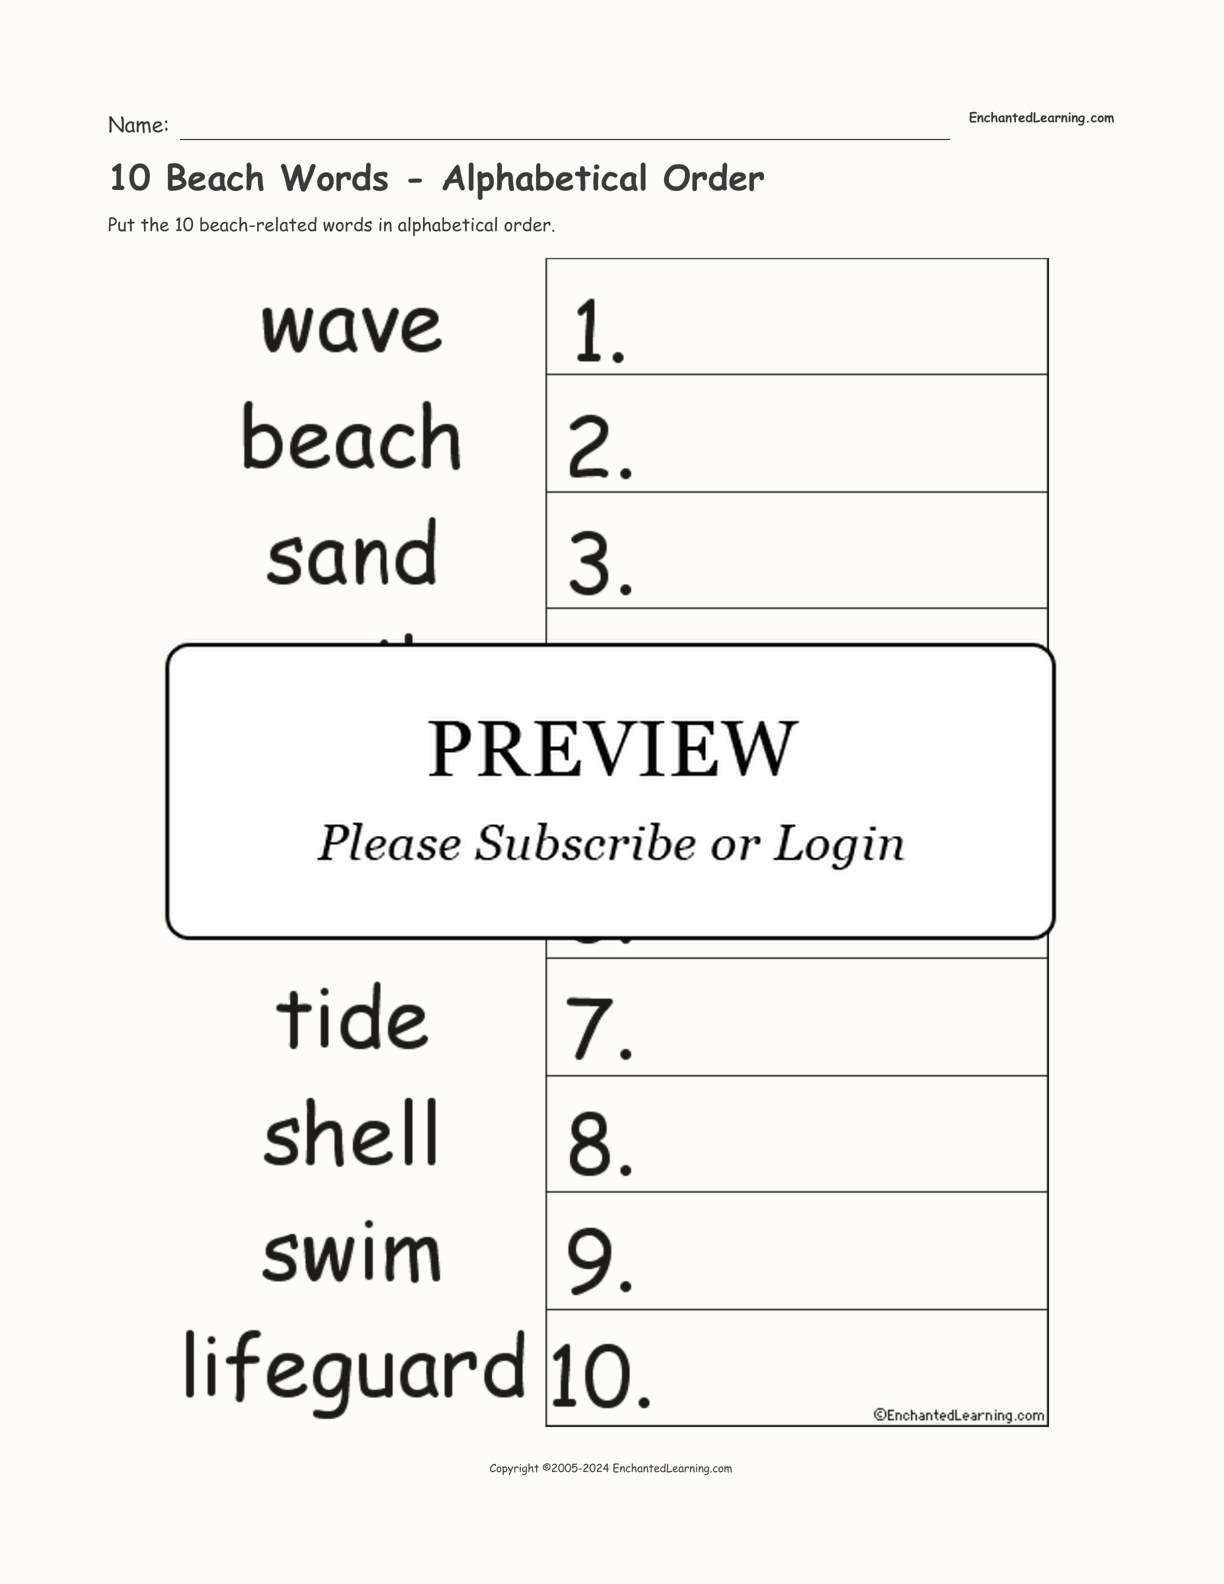 10 Beach Words - Alphabetical Order interactive worksheet page 1